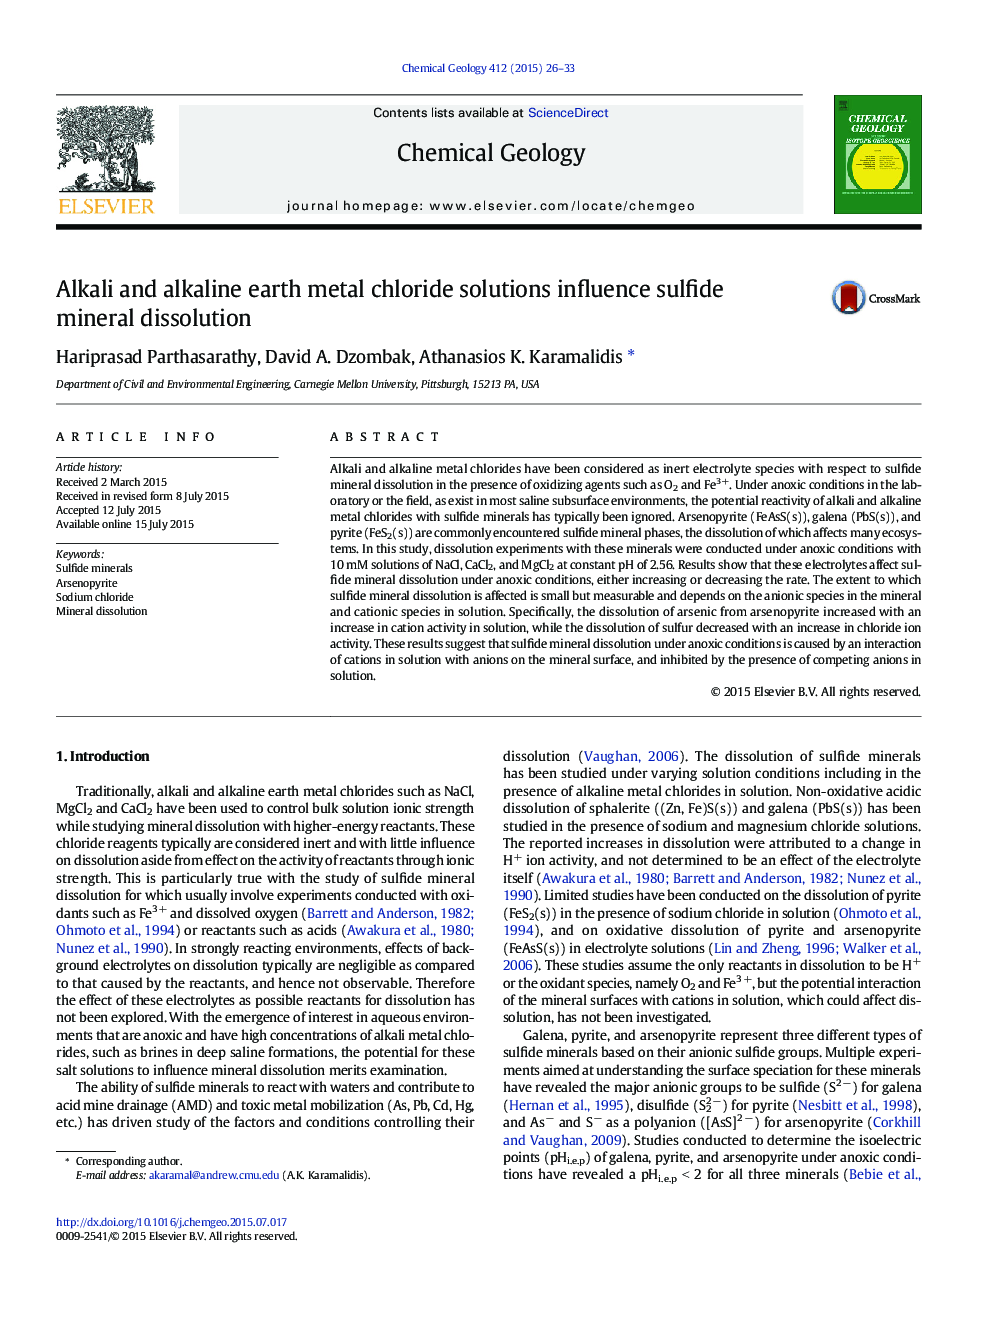 Alkali and alkaline earth metal chloride solutions influence sulfide mineral dissolution